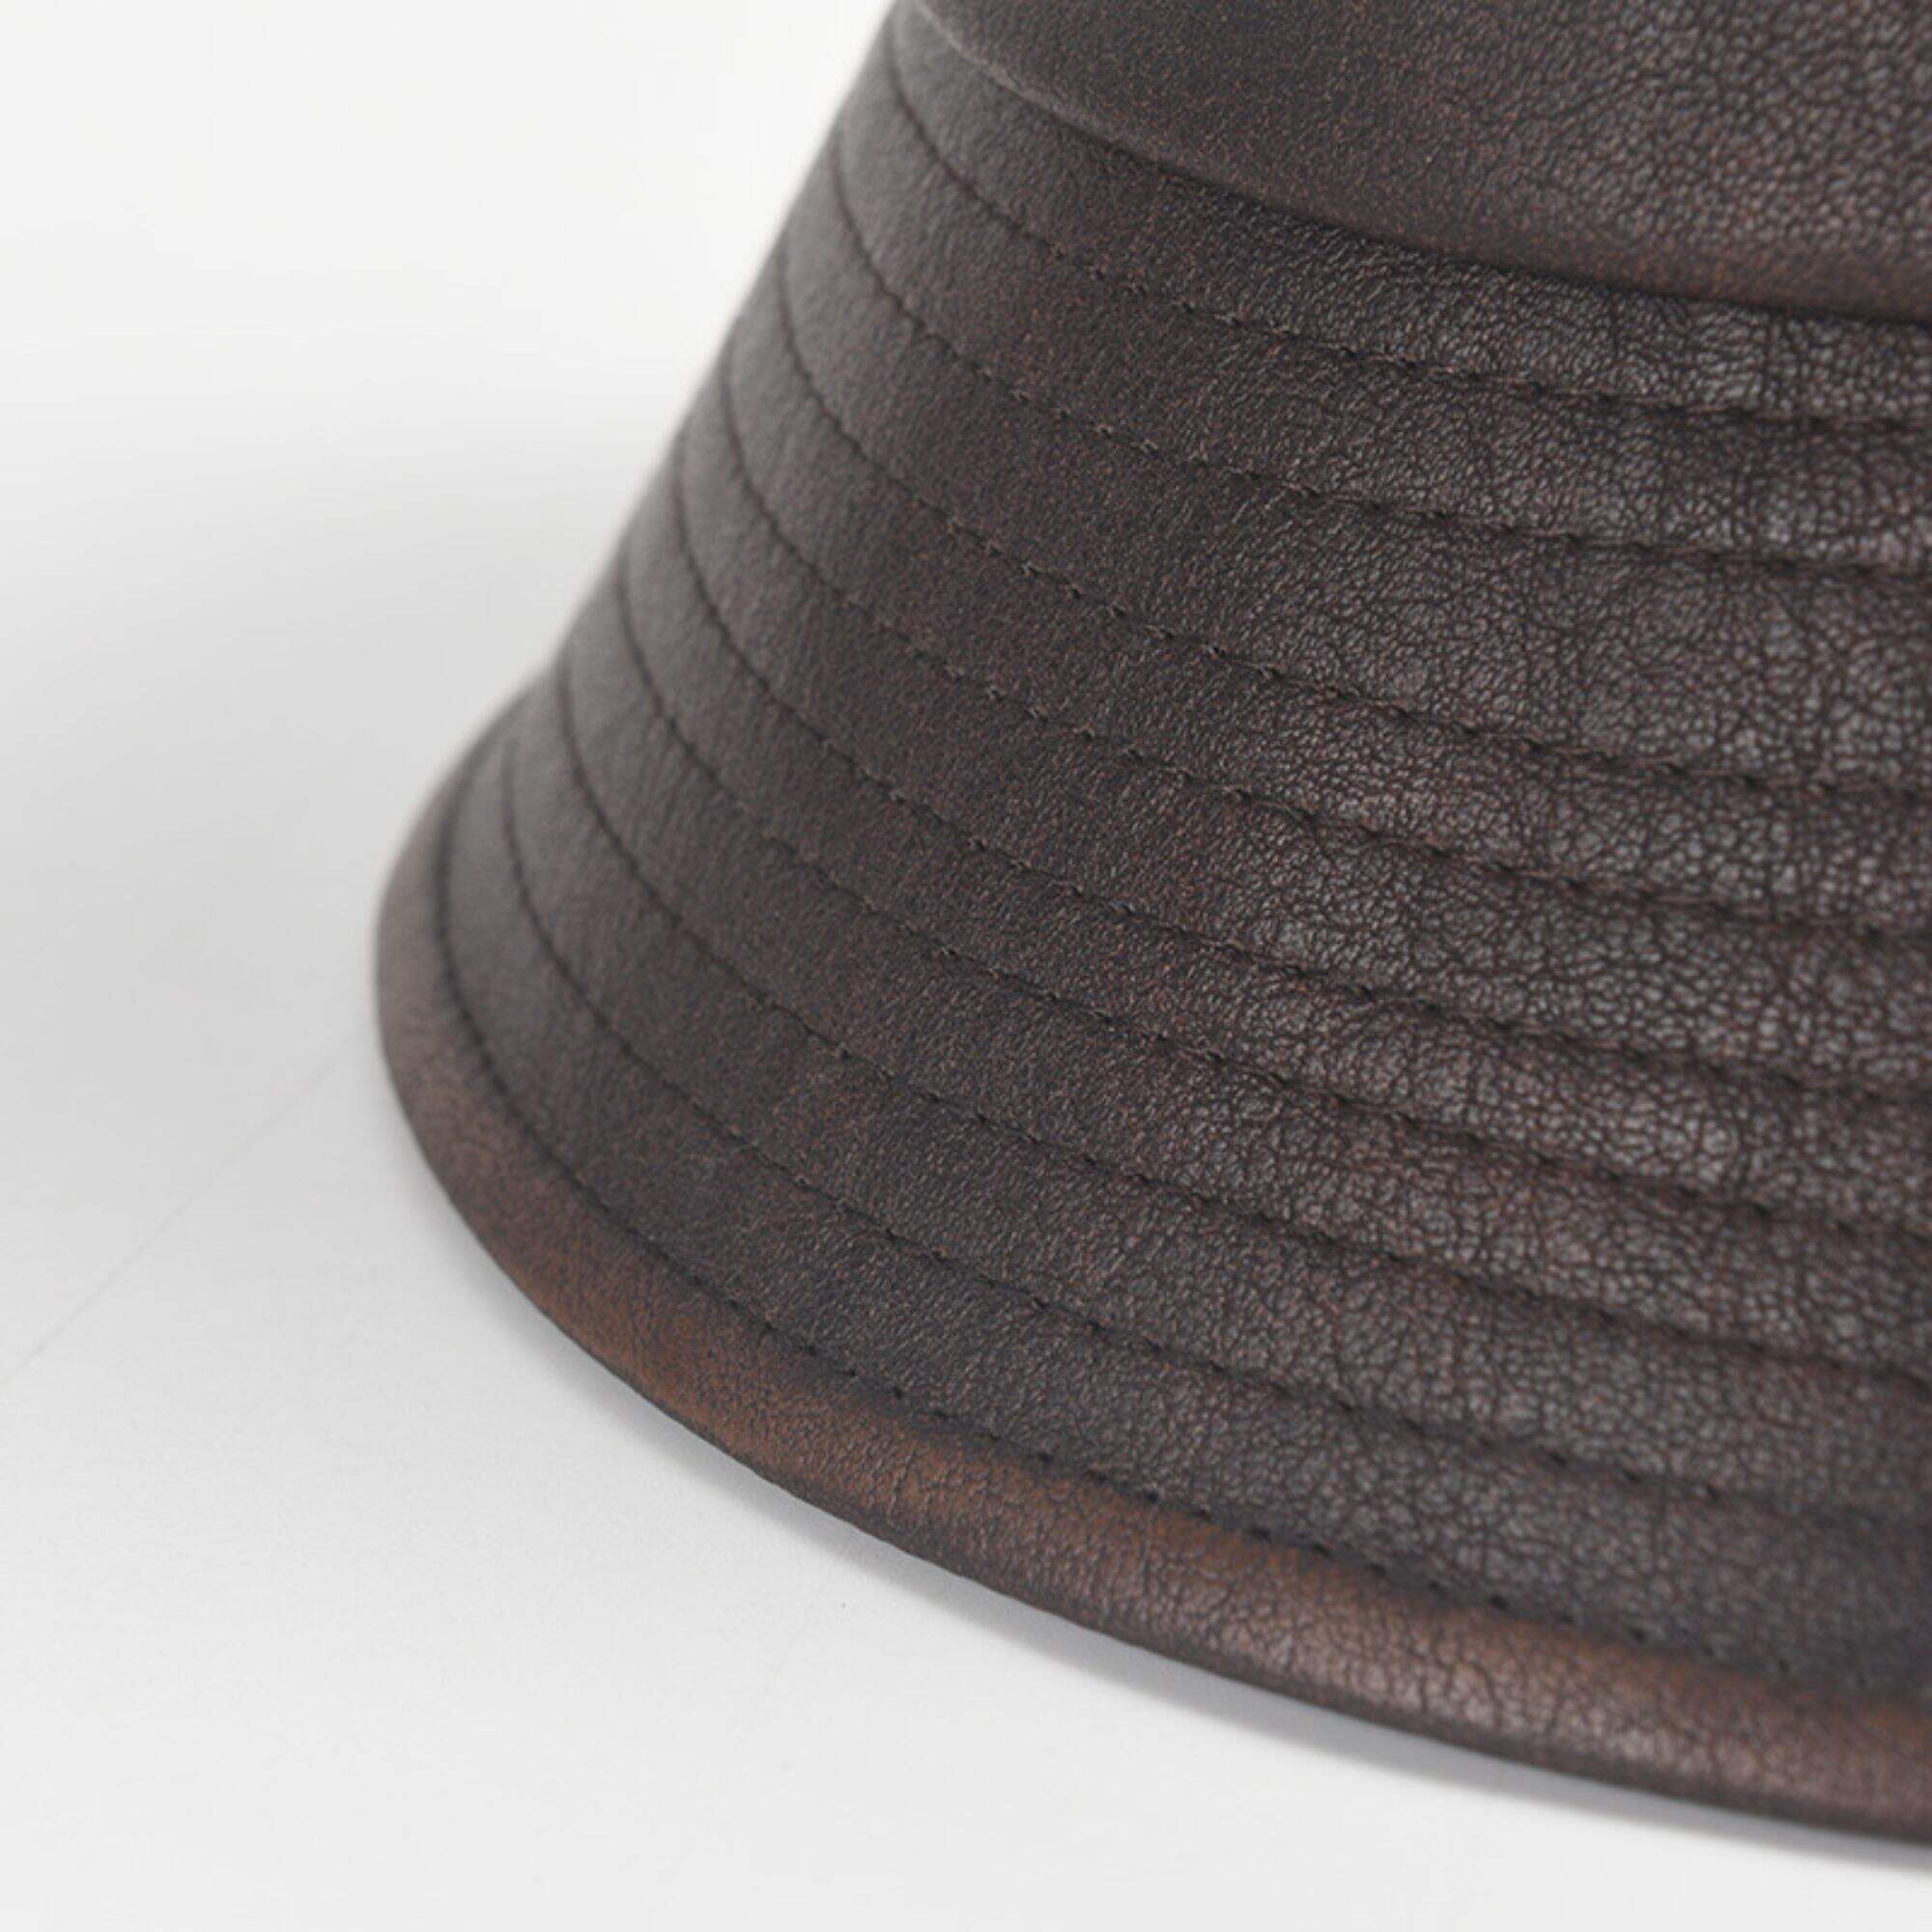 Make old washed PU leather bucket hat